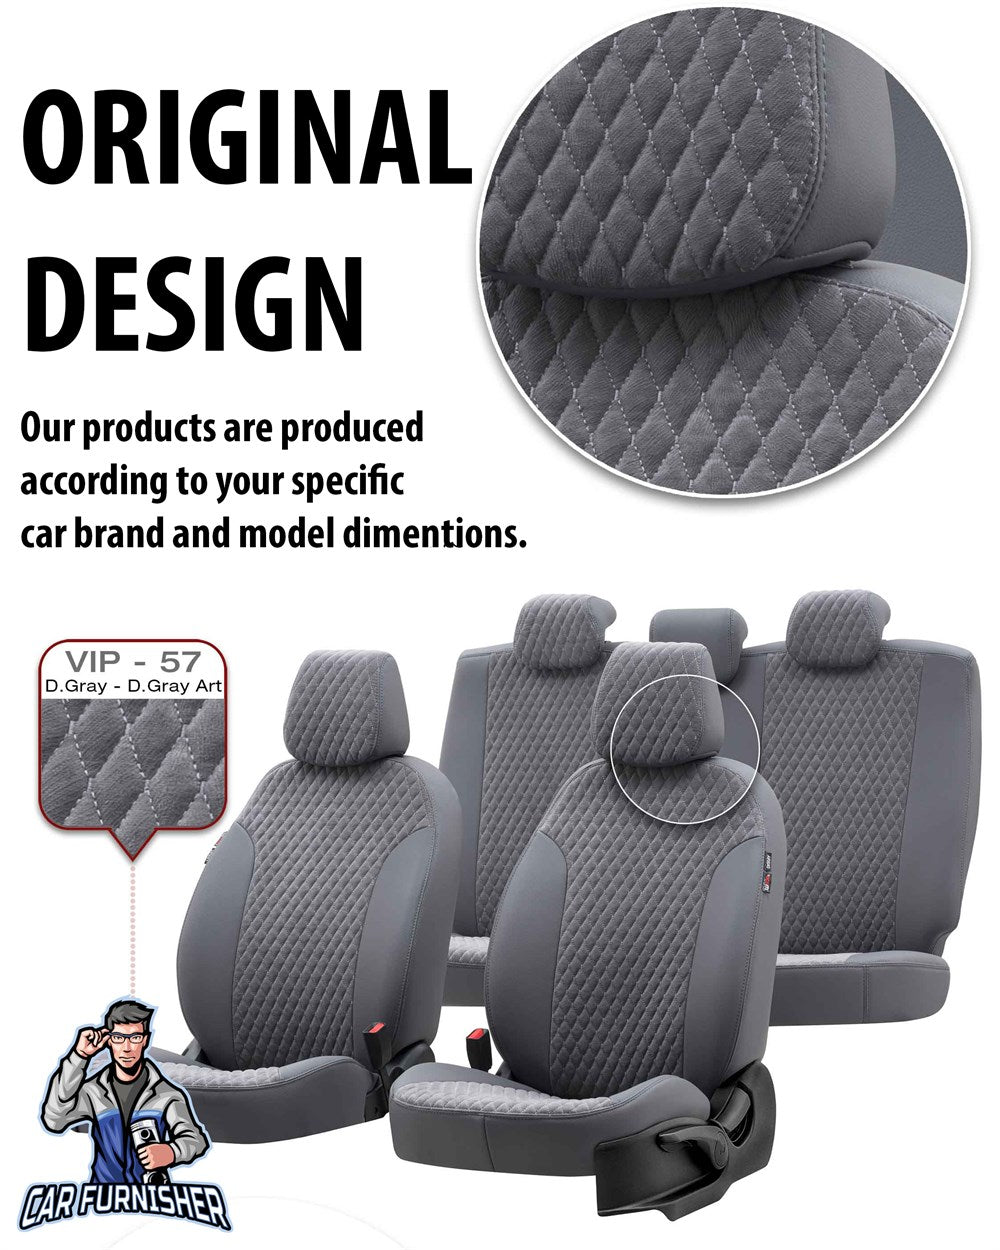 Mitsubishi Canter Seat Covers Amsterdam Foal Feather Design Smoked Black Leather & Foal Feather